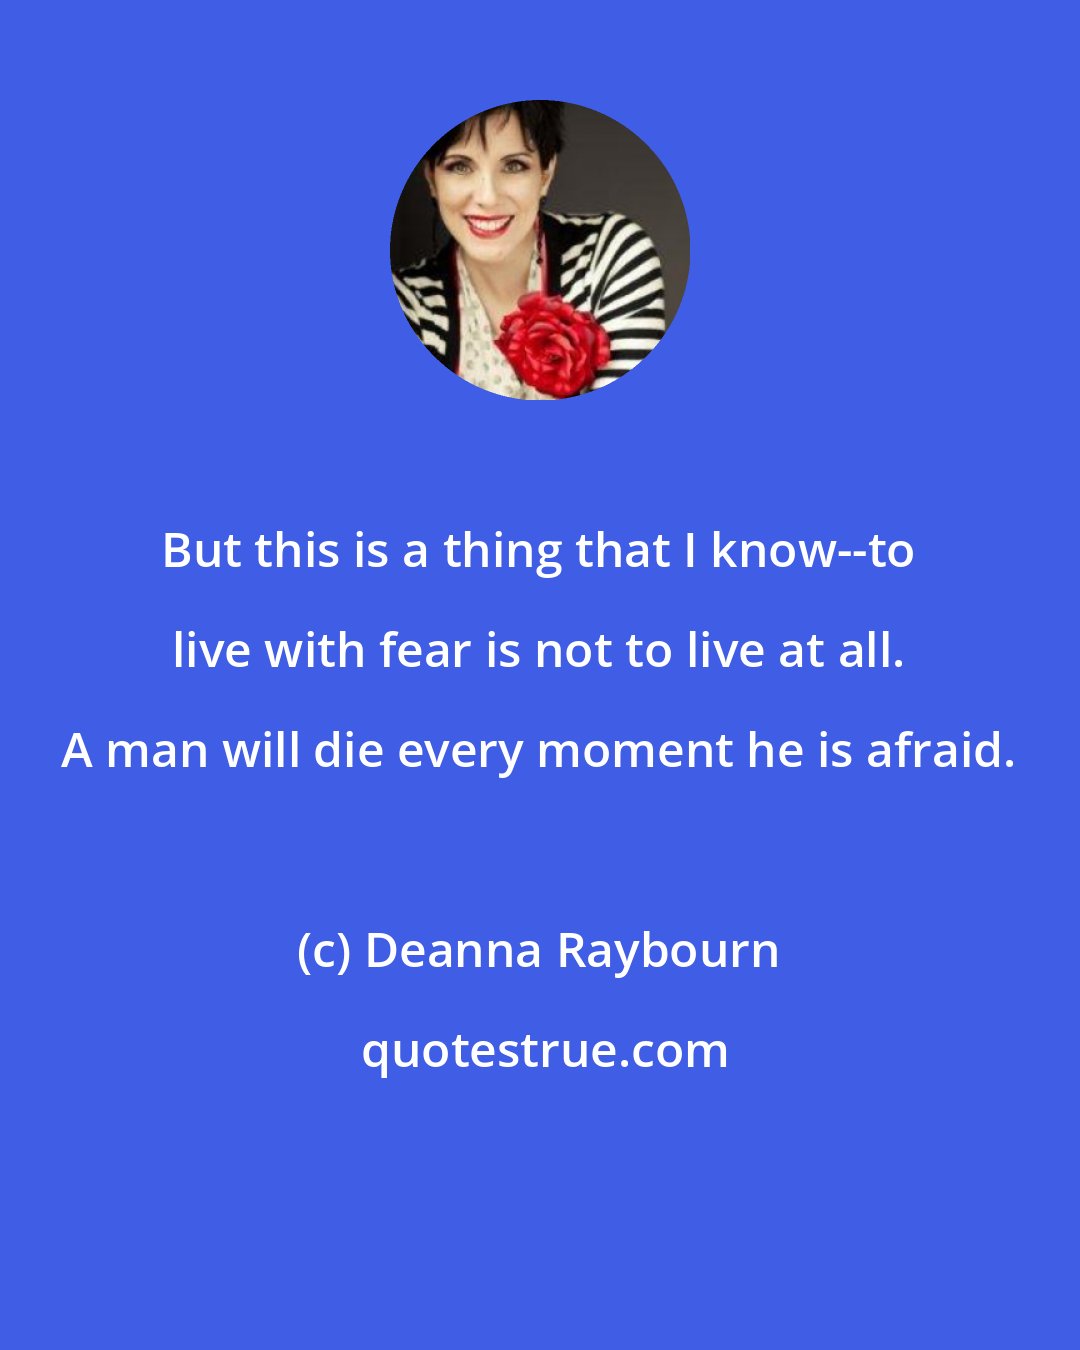 Deanna Raybourn: But this is a thing that I know--to live with fear is not to live at all. A man will die every moment he is afraid.